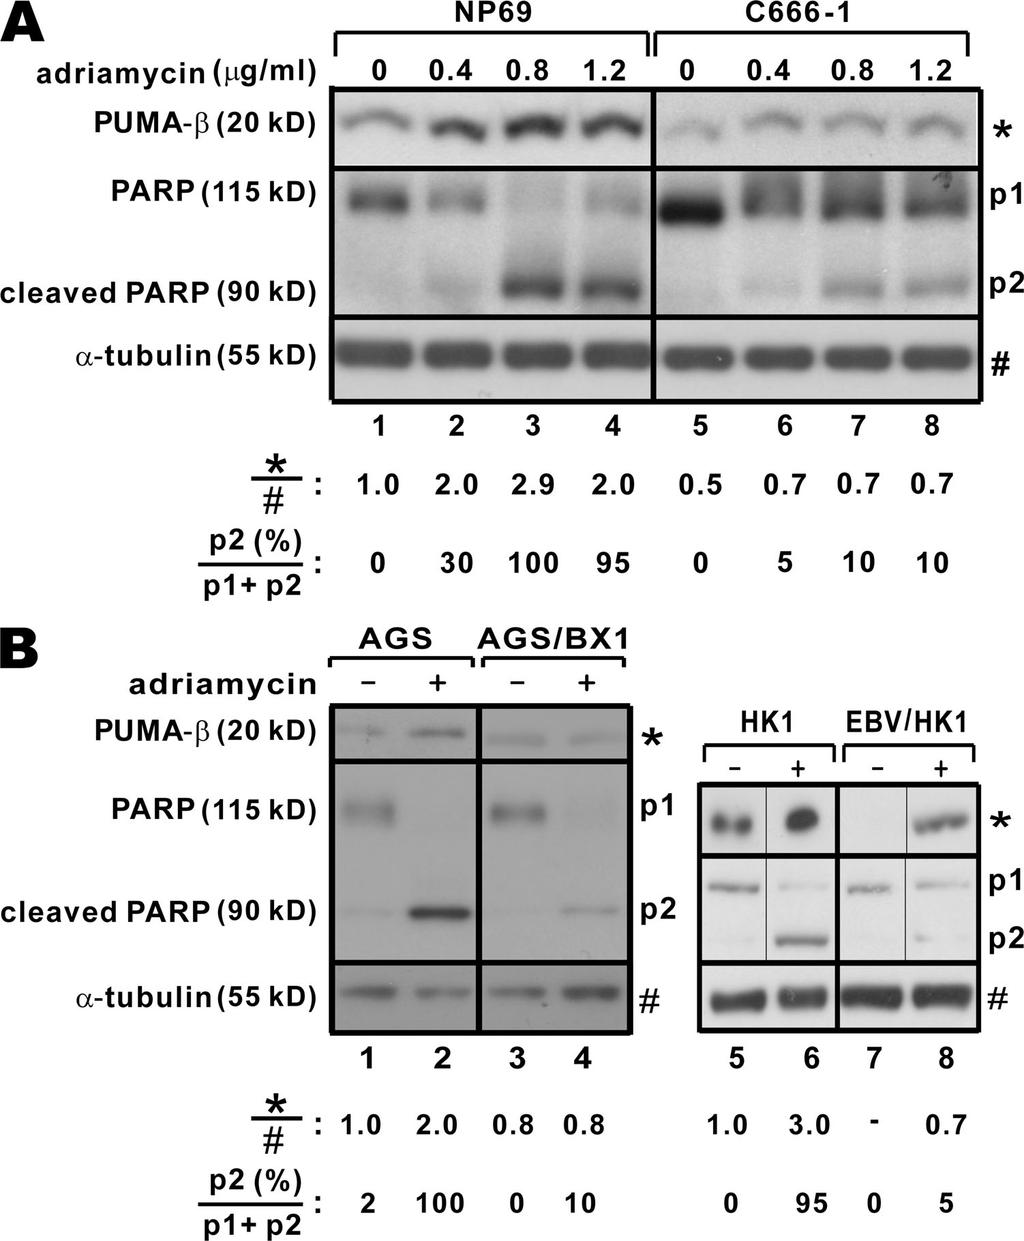 ARTICLE of PUMA expression, it should prevent the accumulation of PUMA protein in both C666-1 and AGS/BX1 cells.